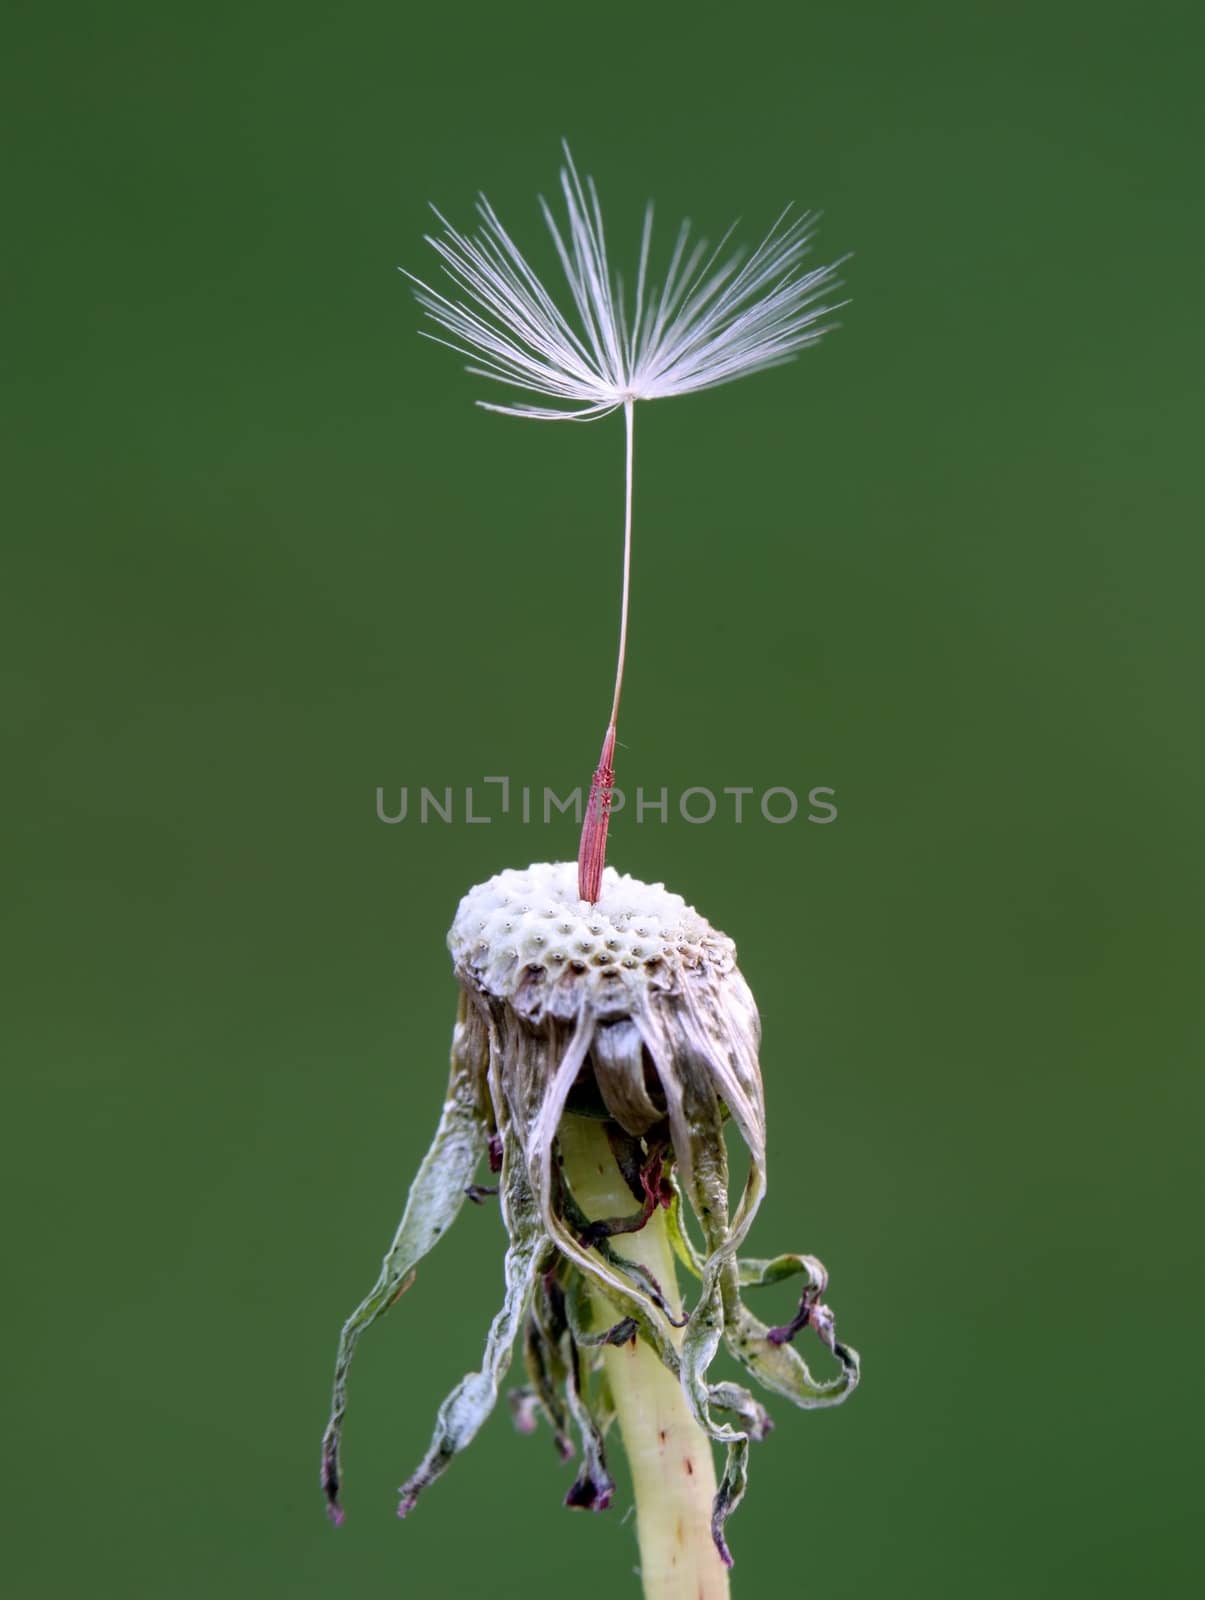 A macro shot of a single dandelion seed on the tip of a dandelion.